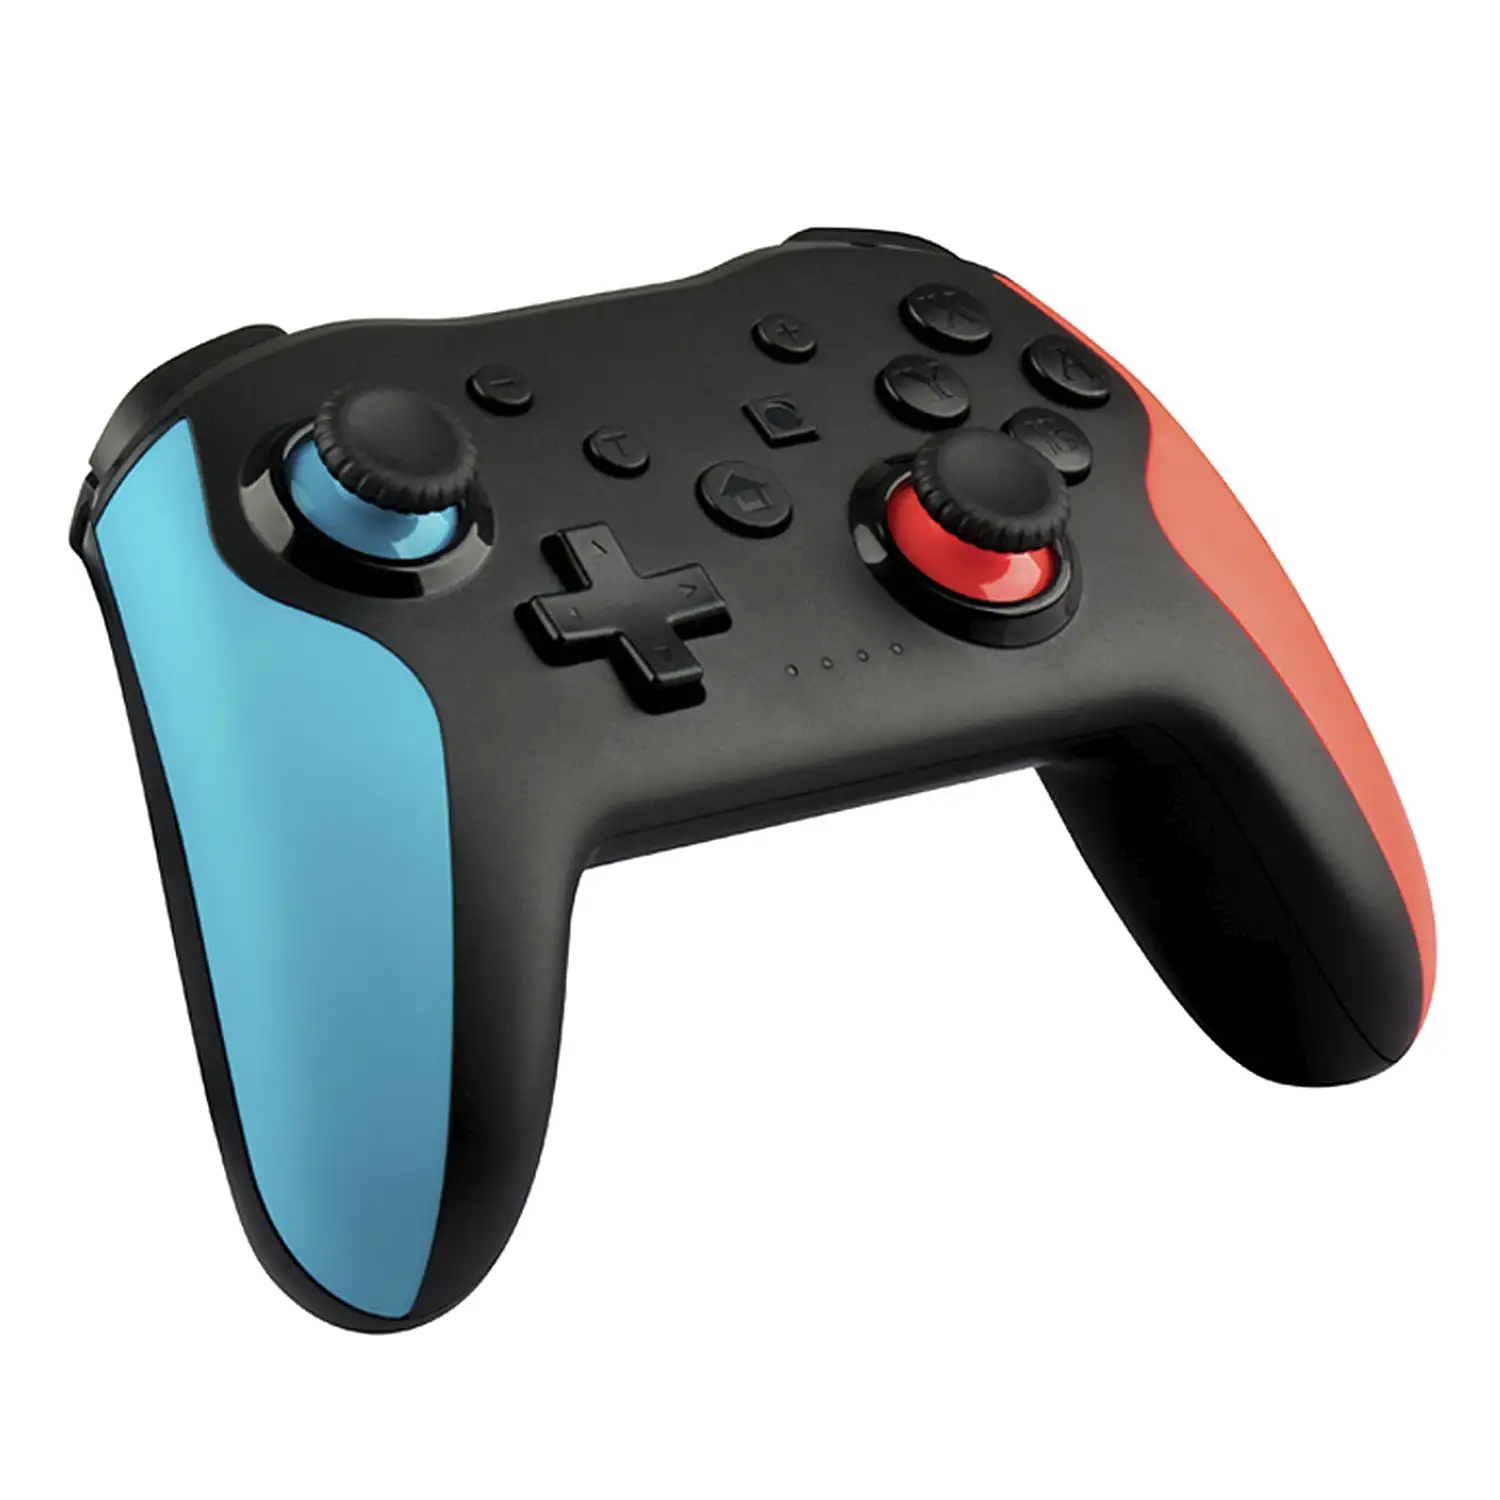 Mando inalámbrico bluetooth.Compatible con N-Switch/PS3/PC/Android phone/Android TV platform.